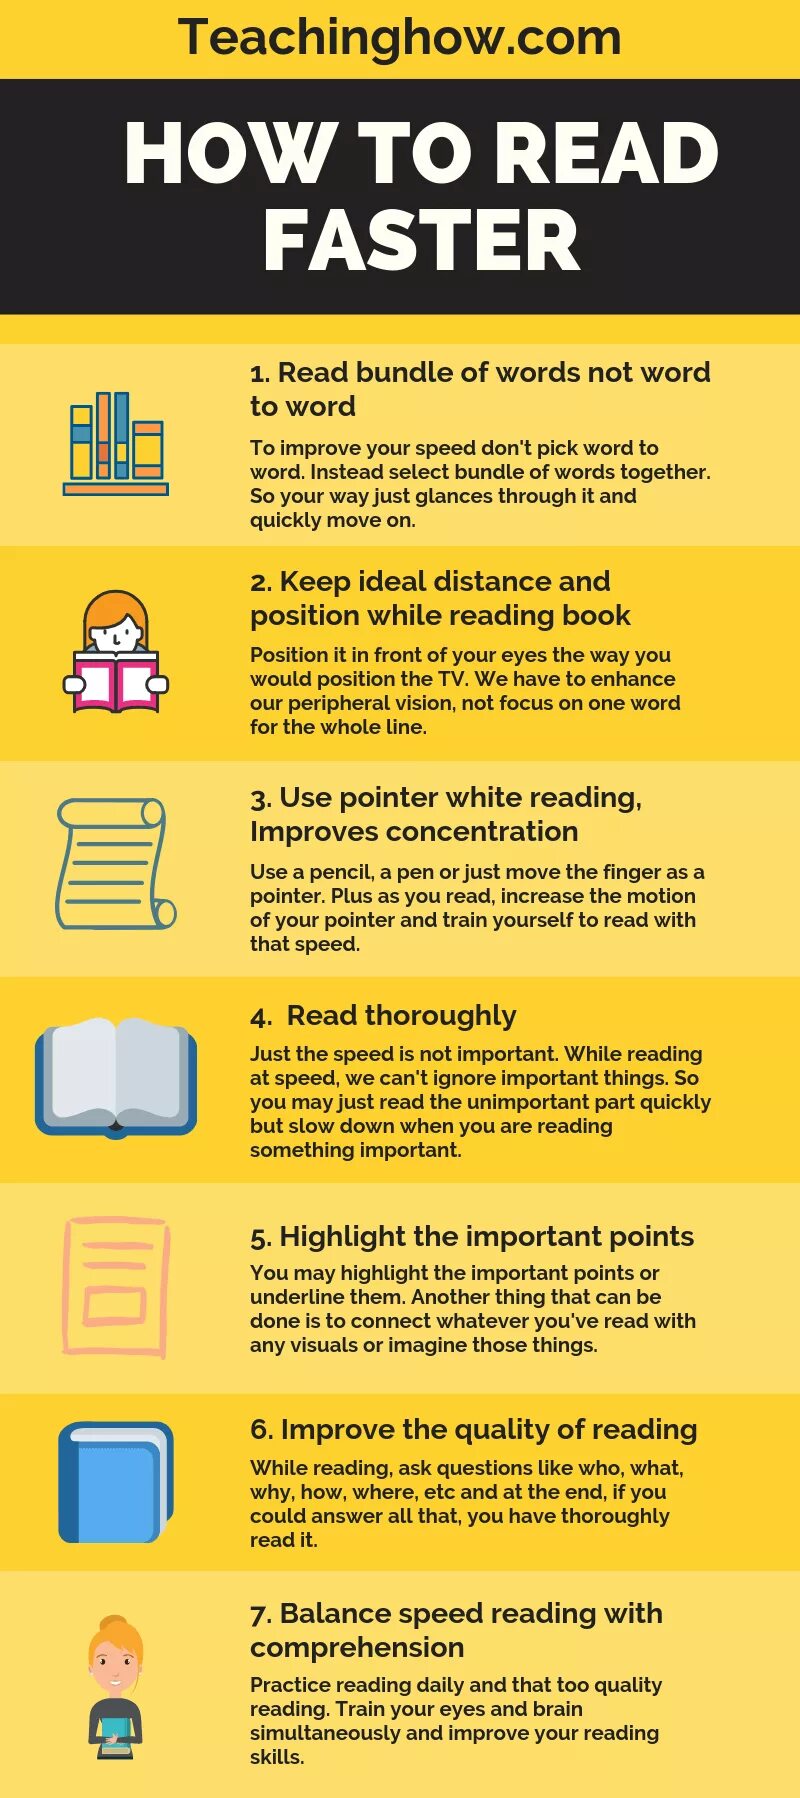 How to read better. How to improve reading skills. Improving reading skills. Reading Tips. Improve your skills reading.